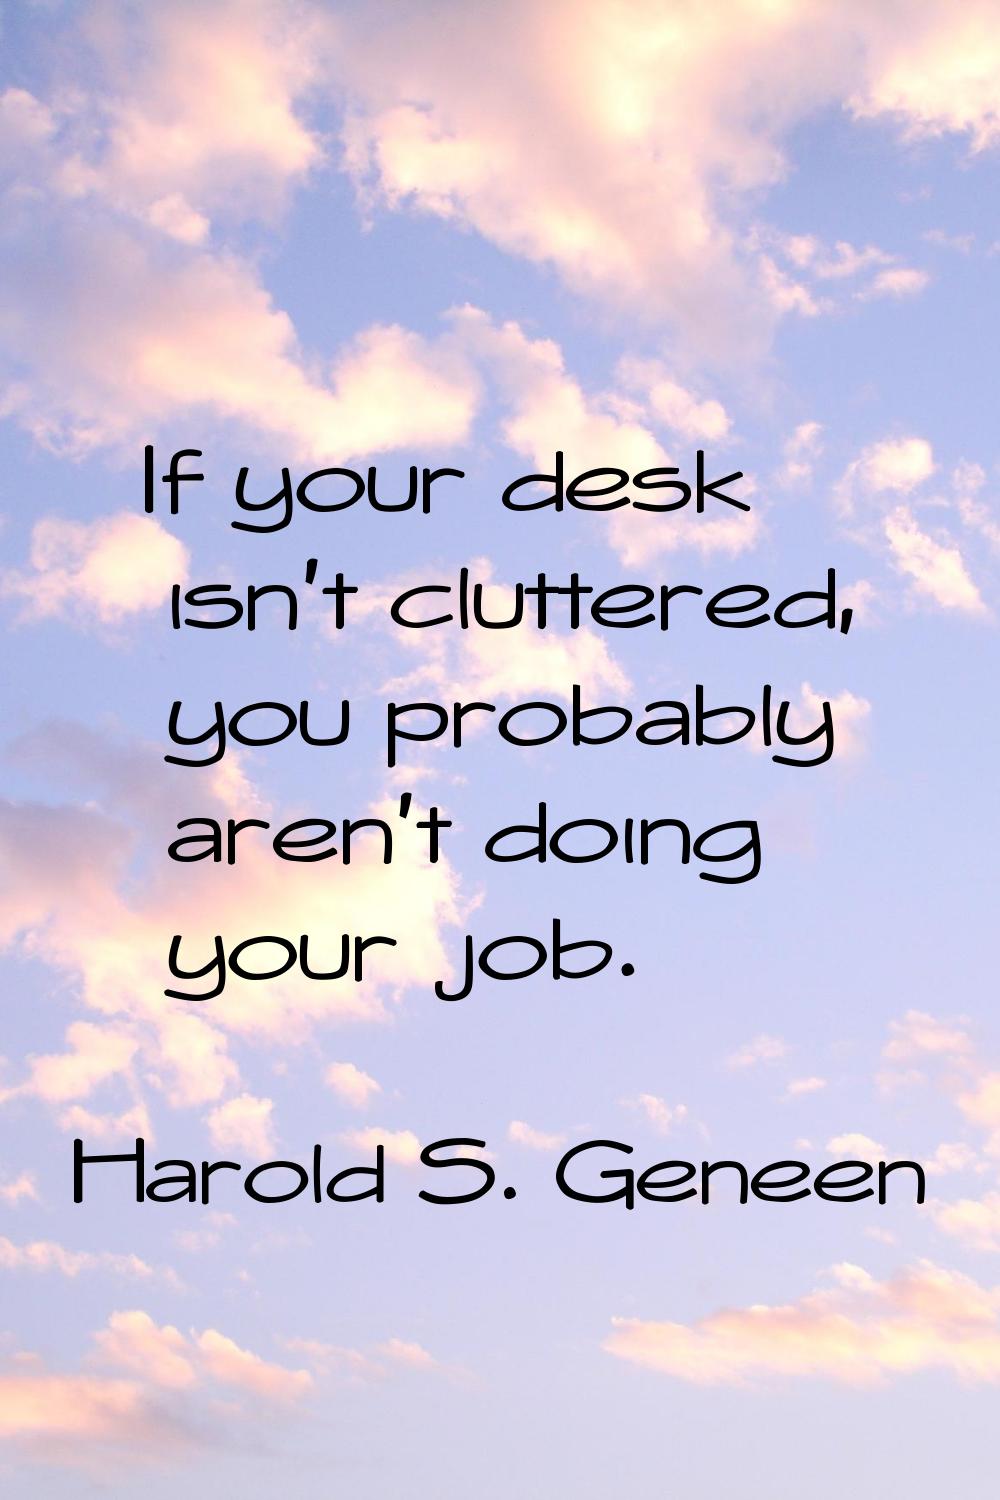 If your desk isn't cluttered, you probably aren't doing your job.